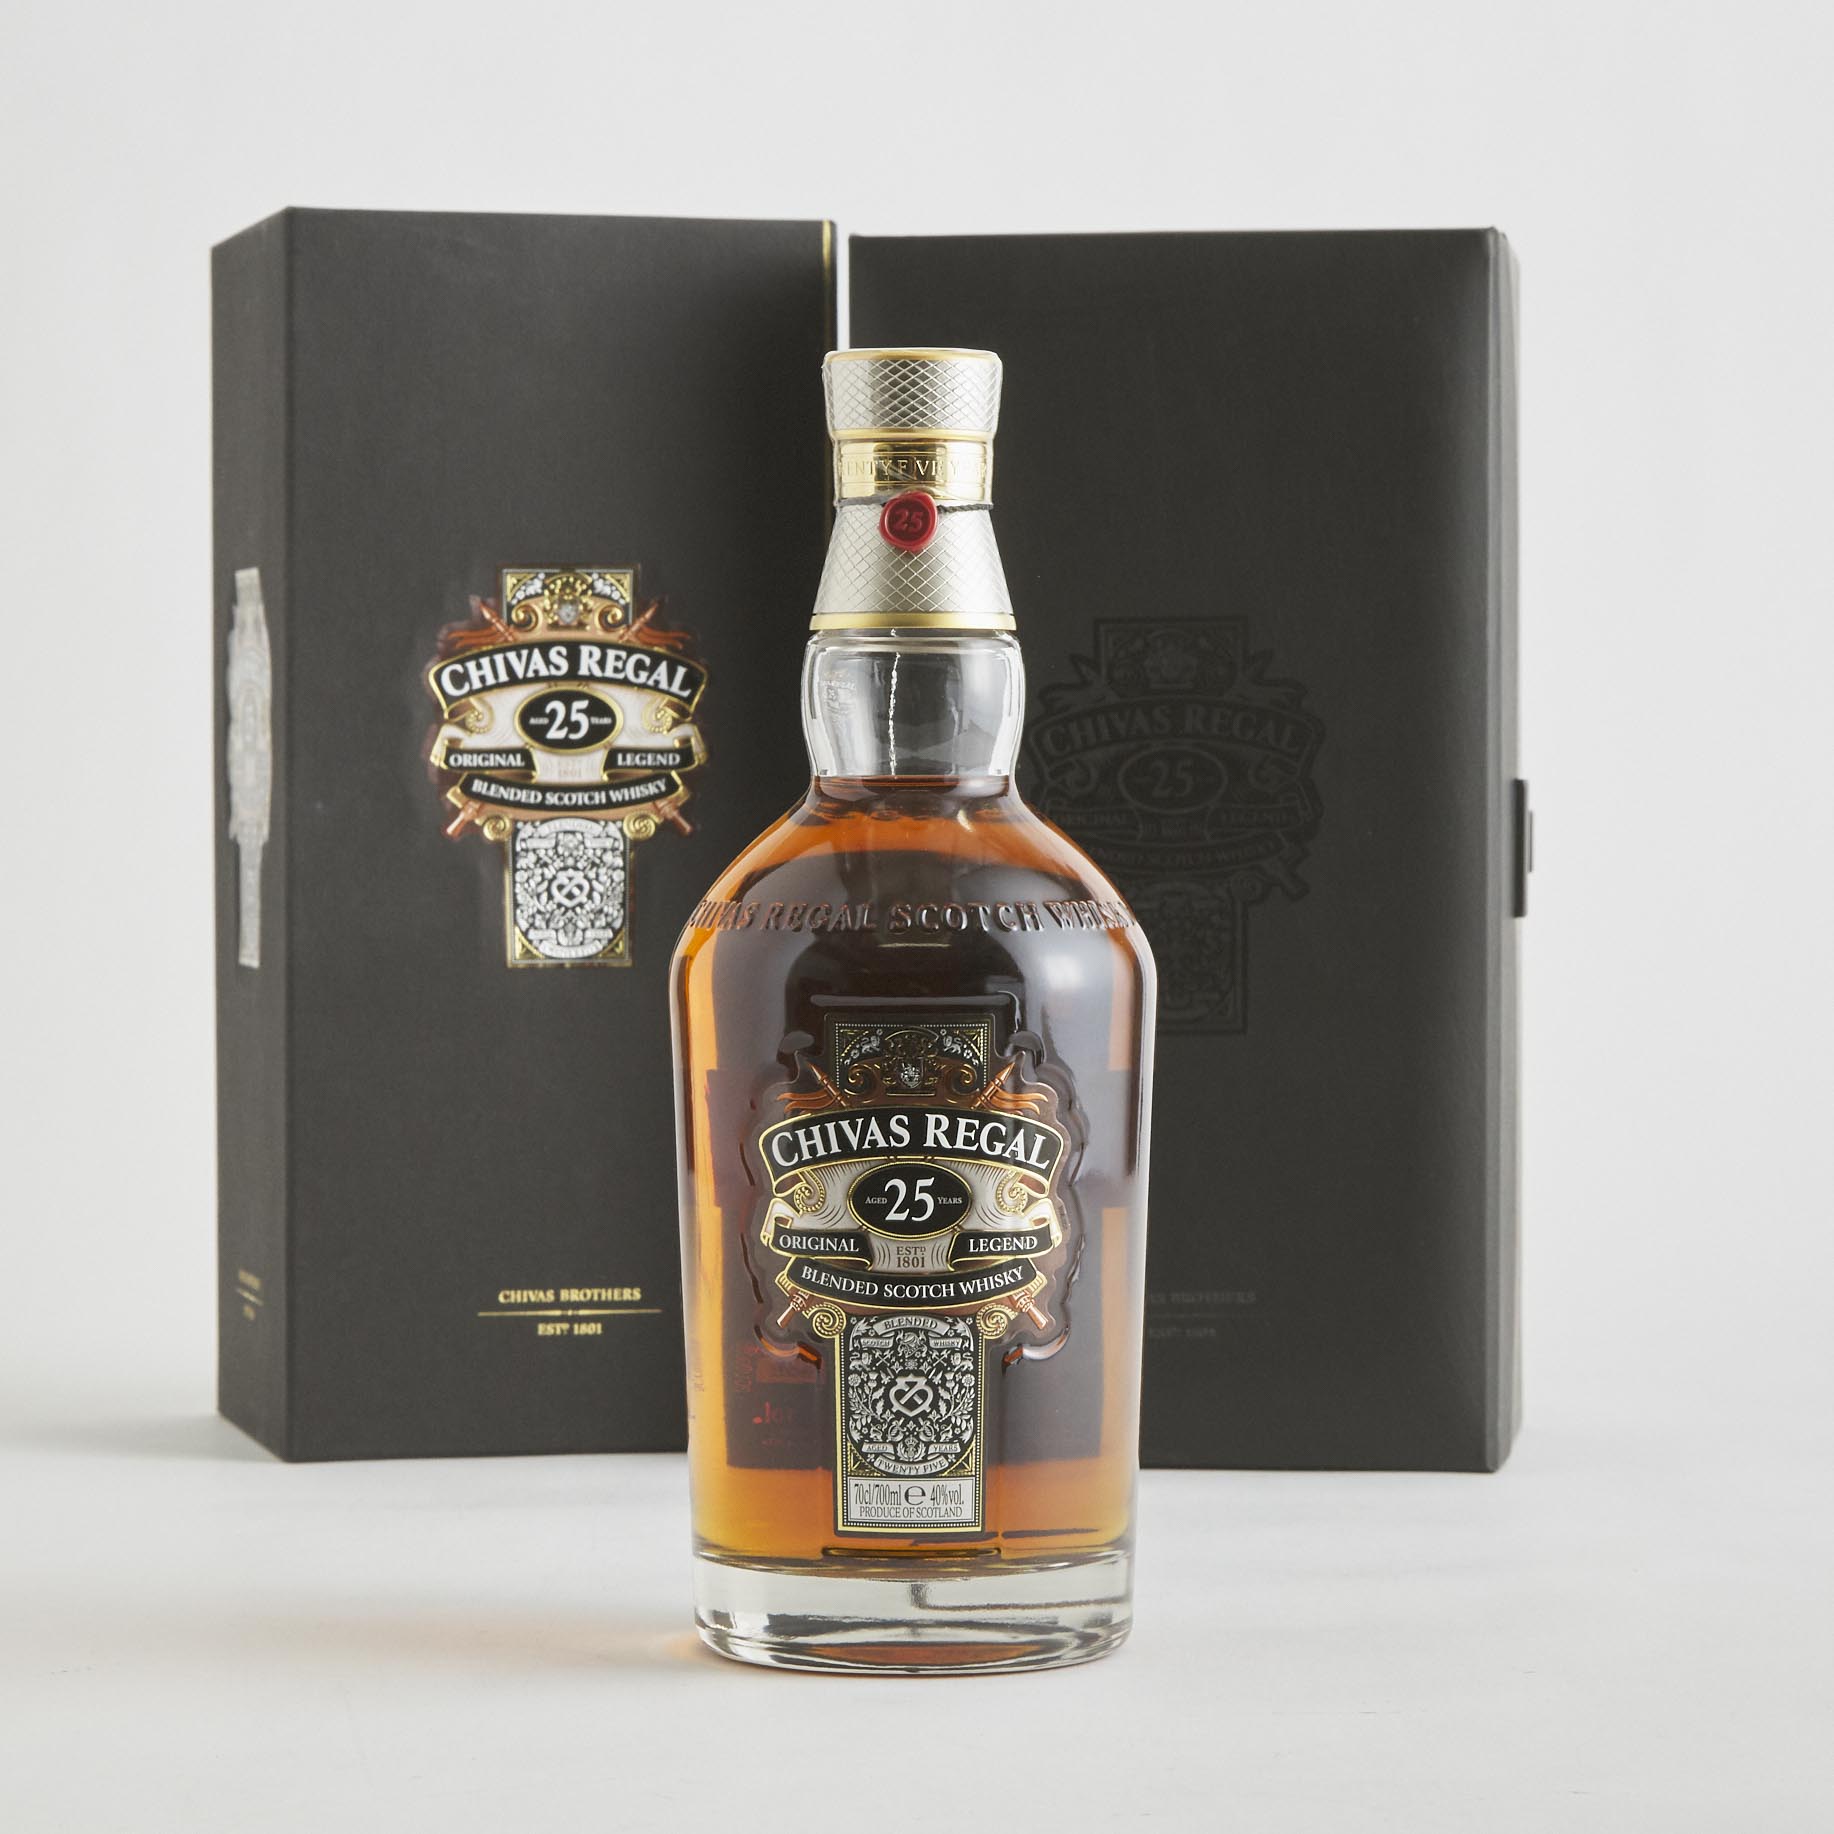 CHIVAS REGAL BLENDED SCOTCH WHISKY 25 YEARS (ONE 750 ML)